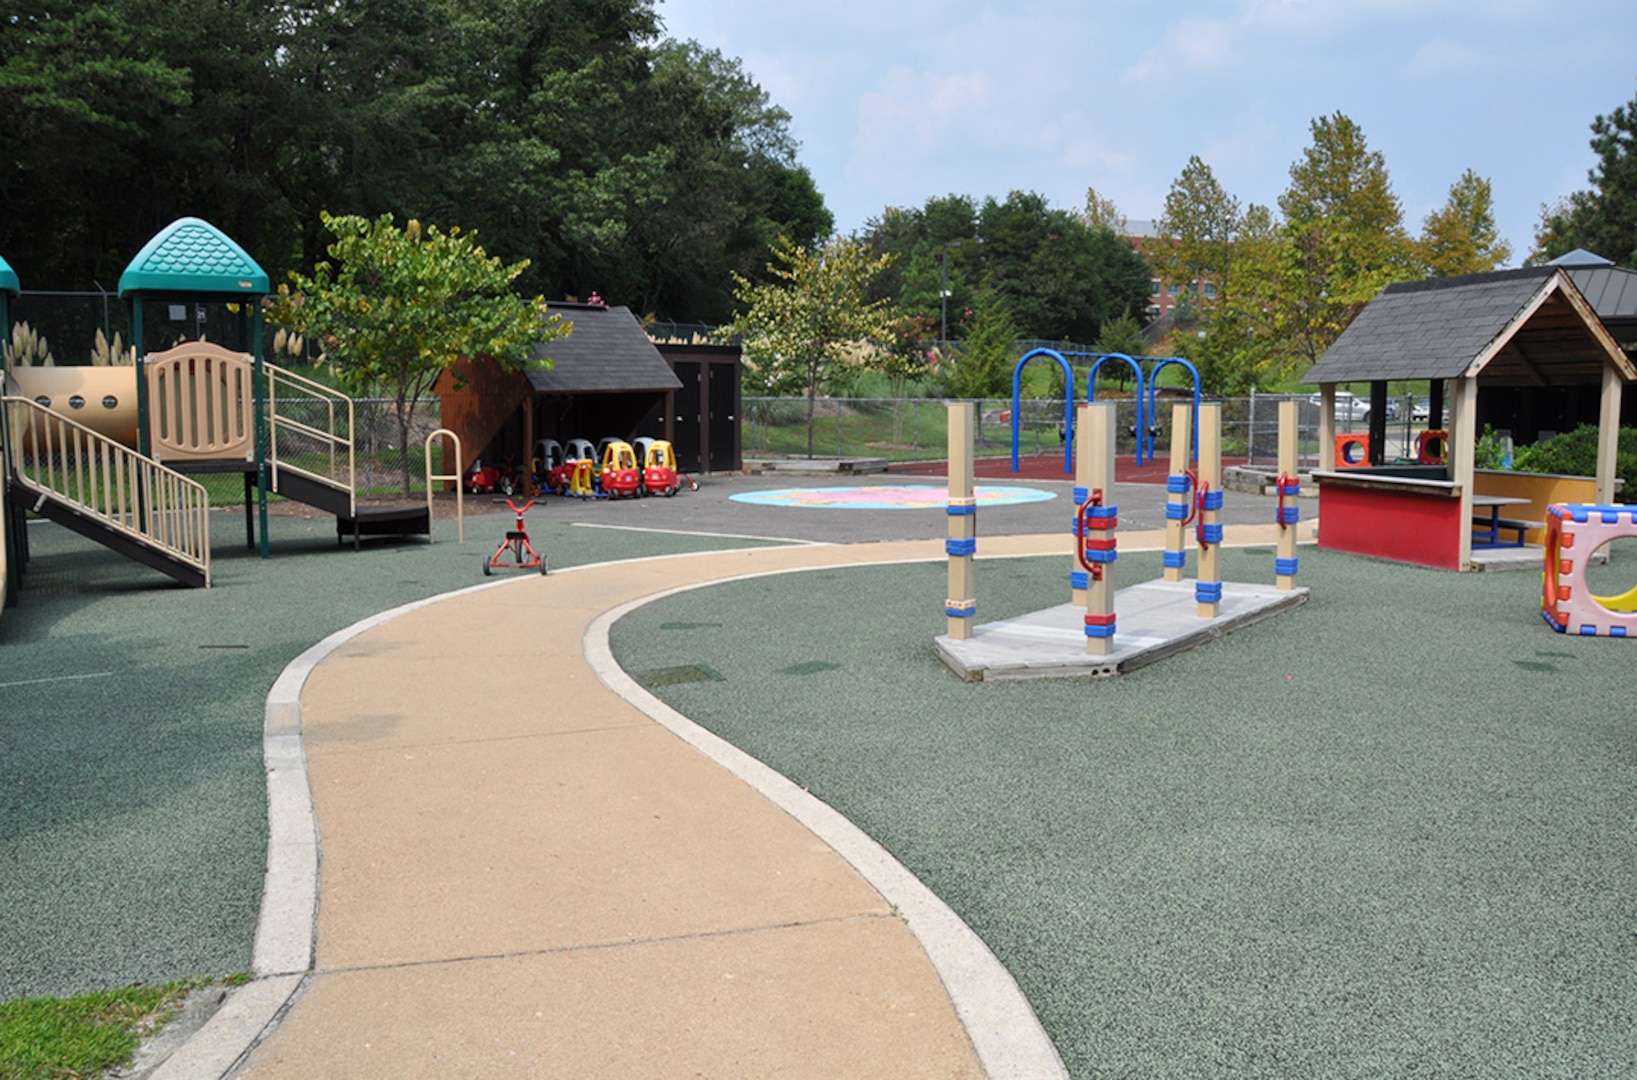 A new playground renovation at the Defense Logistics Agency Child Development Center is scheduled to be complete by spring 2016. In addition to a trike path, new rubber surfacing and storage sections, the CDC’s infant and toddler playground will also receive new play equipment and swings, making the area more age-appropriate. 